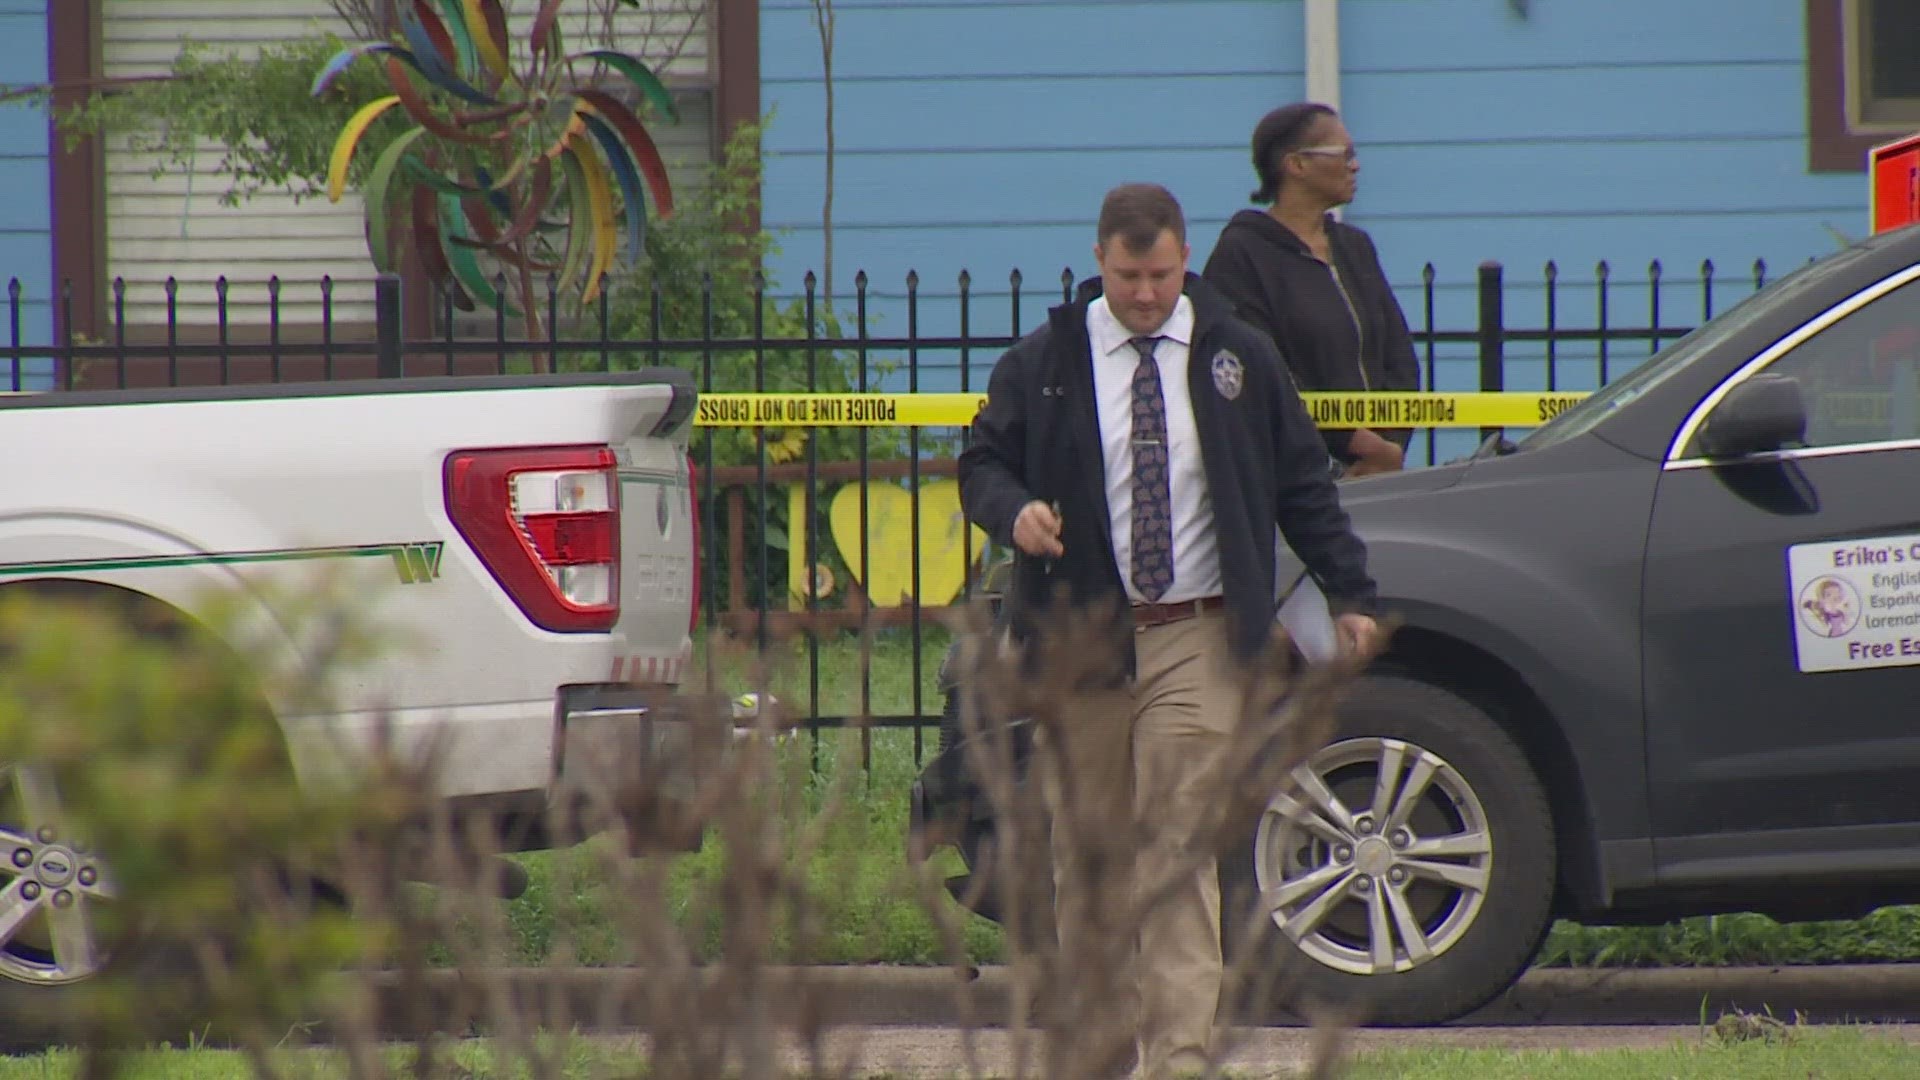 In Dallas, detectives are trying to determine why a woman shot and killed her 80-year-old grandmother.